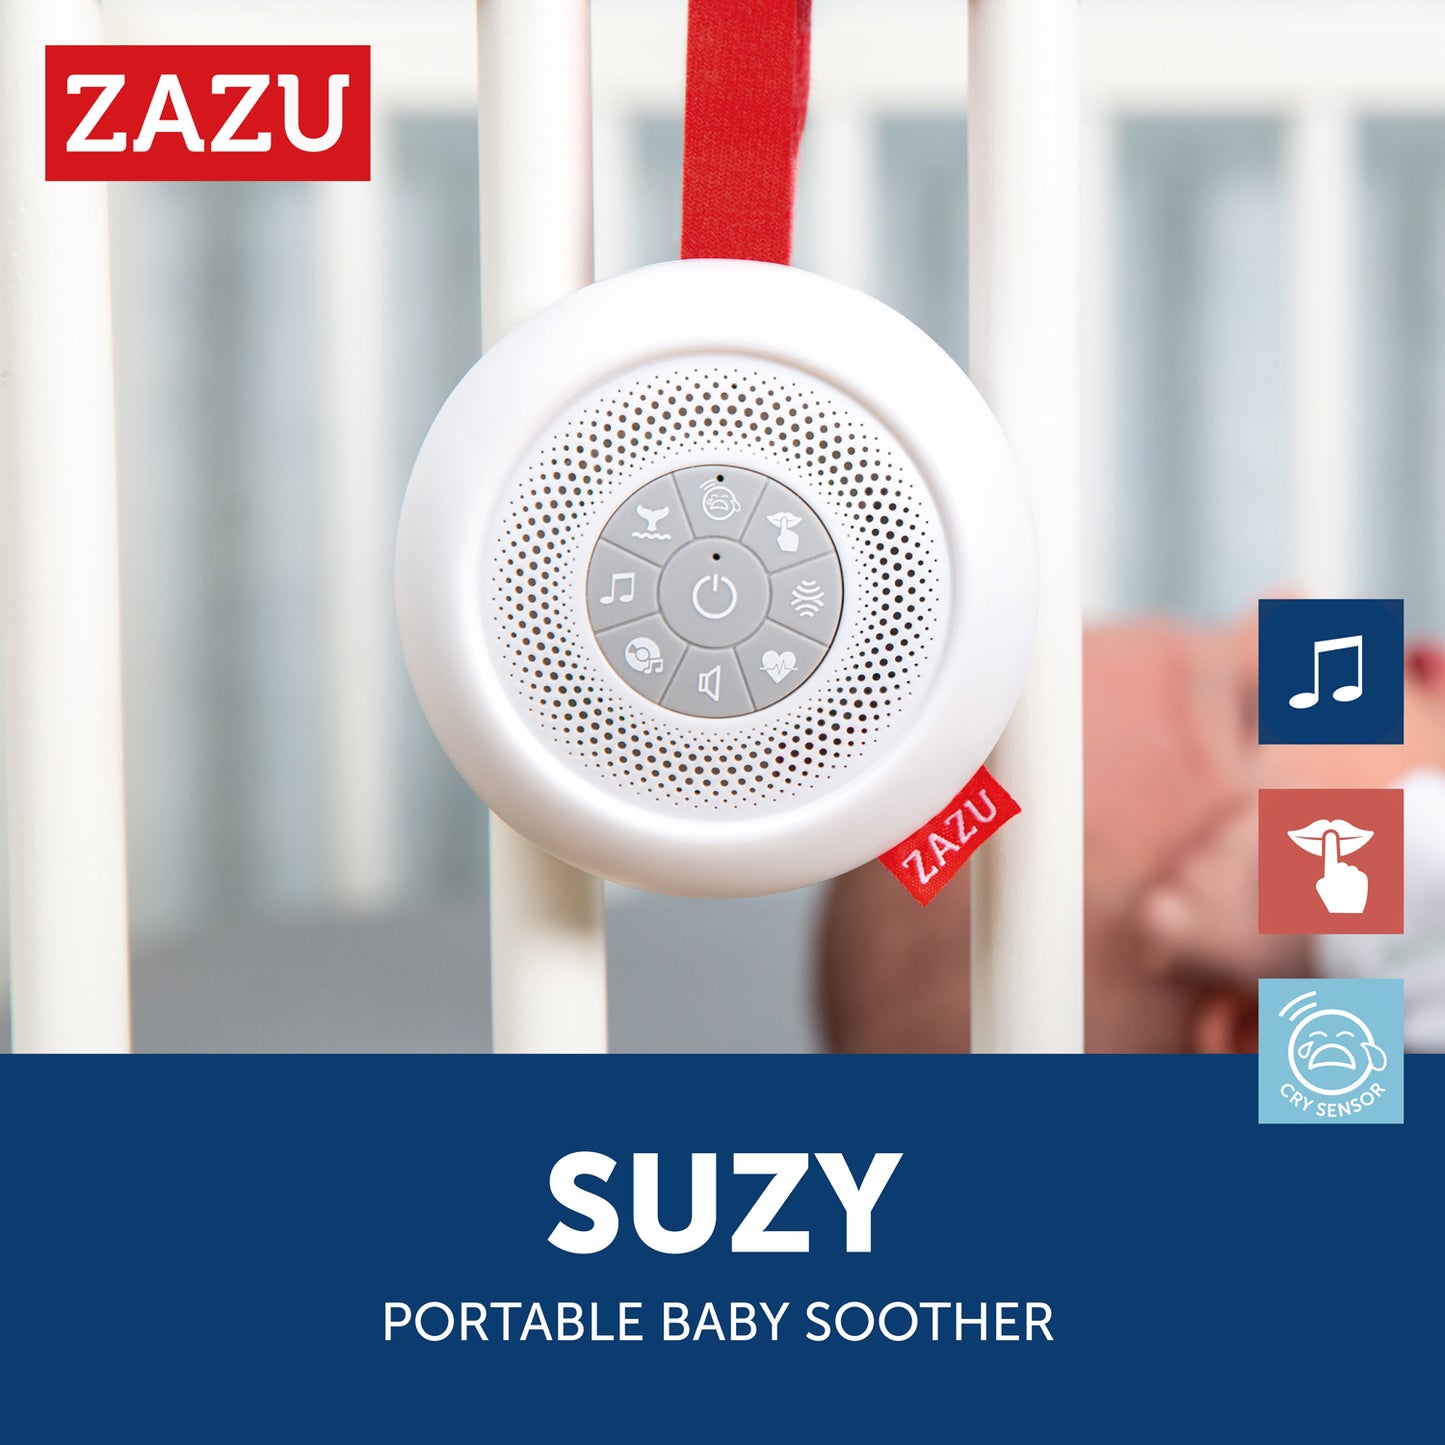 [Zazu] Suzy the Shusher, Portable Baby Soother with 6 Calming Sounds and Cry Sensor